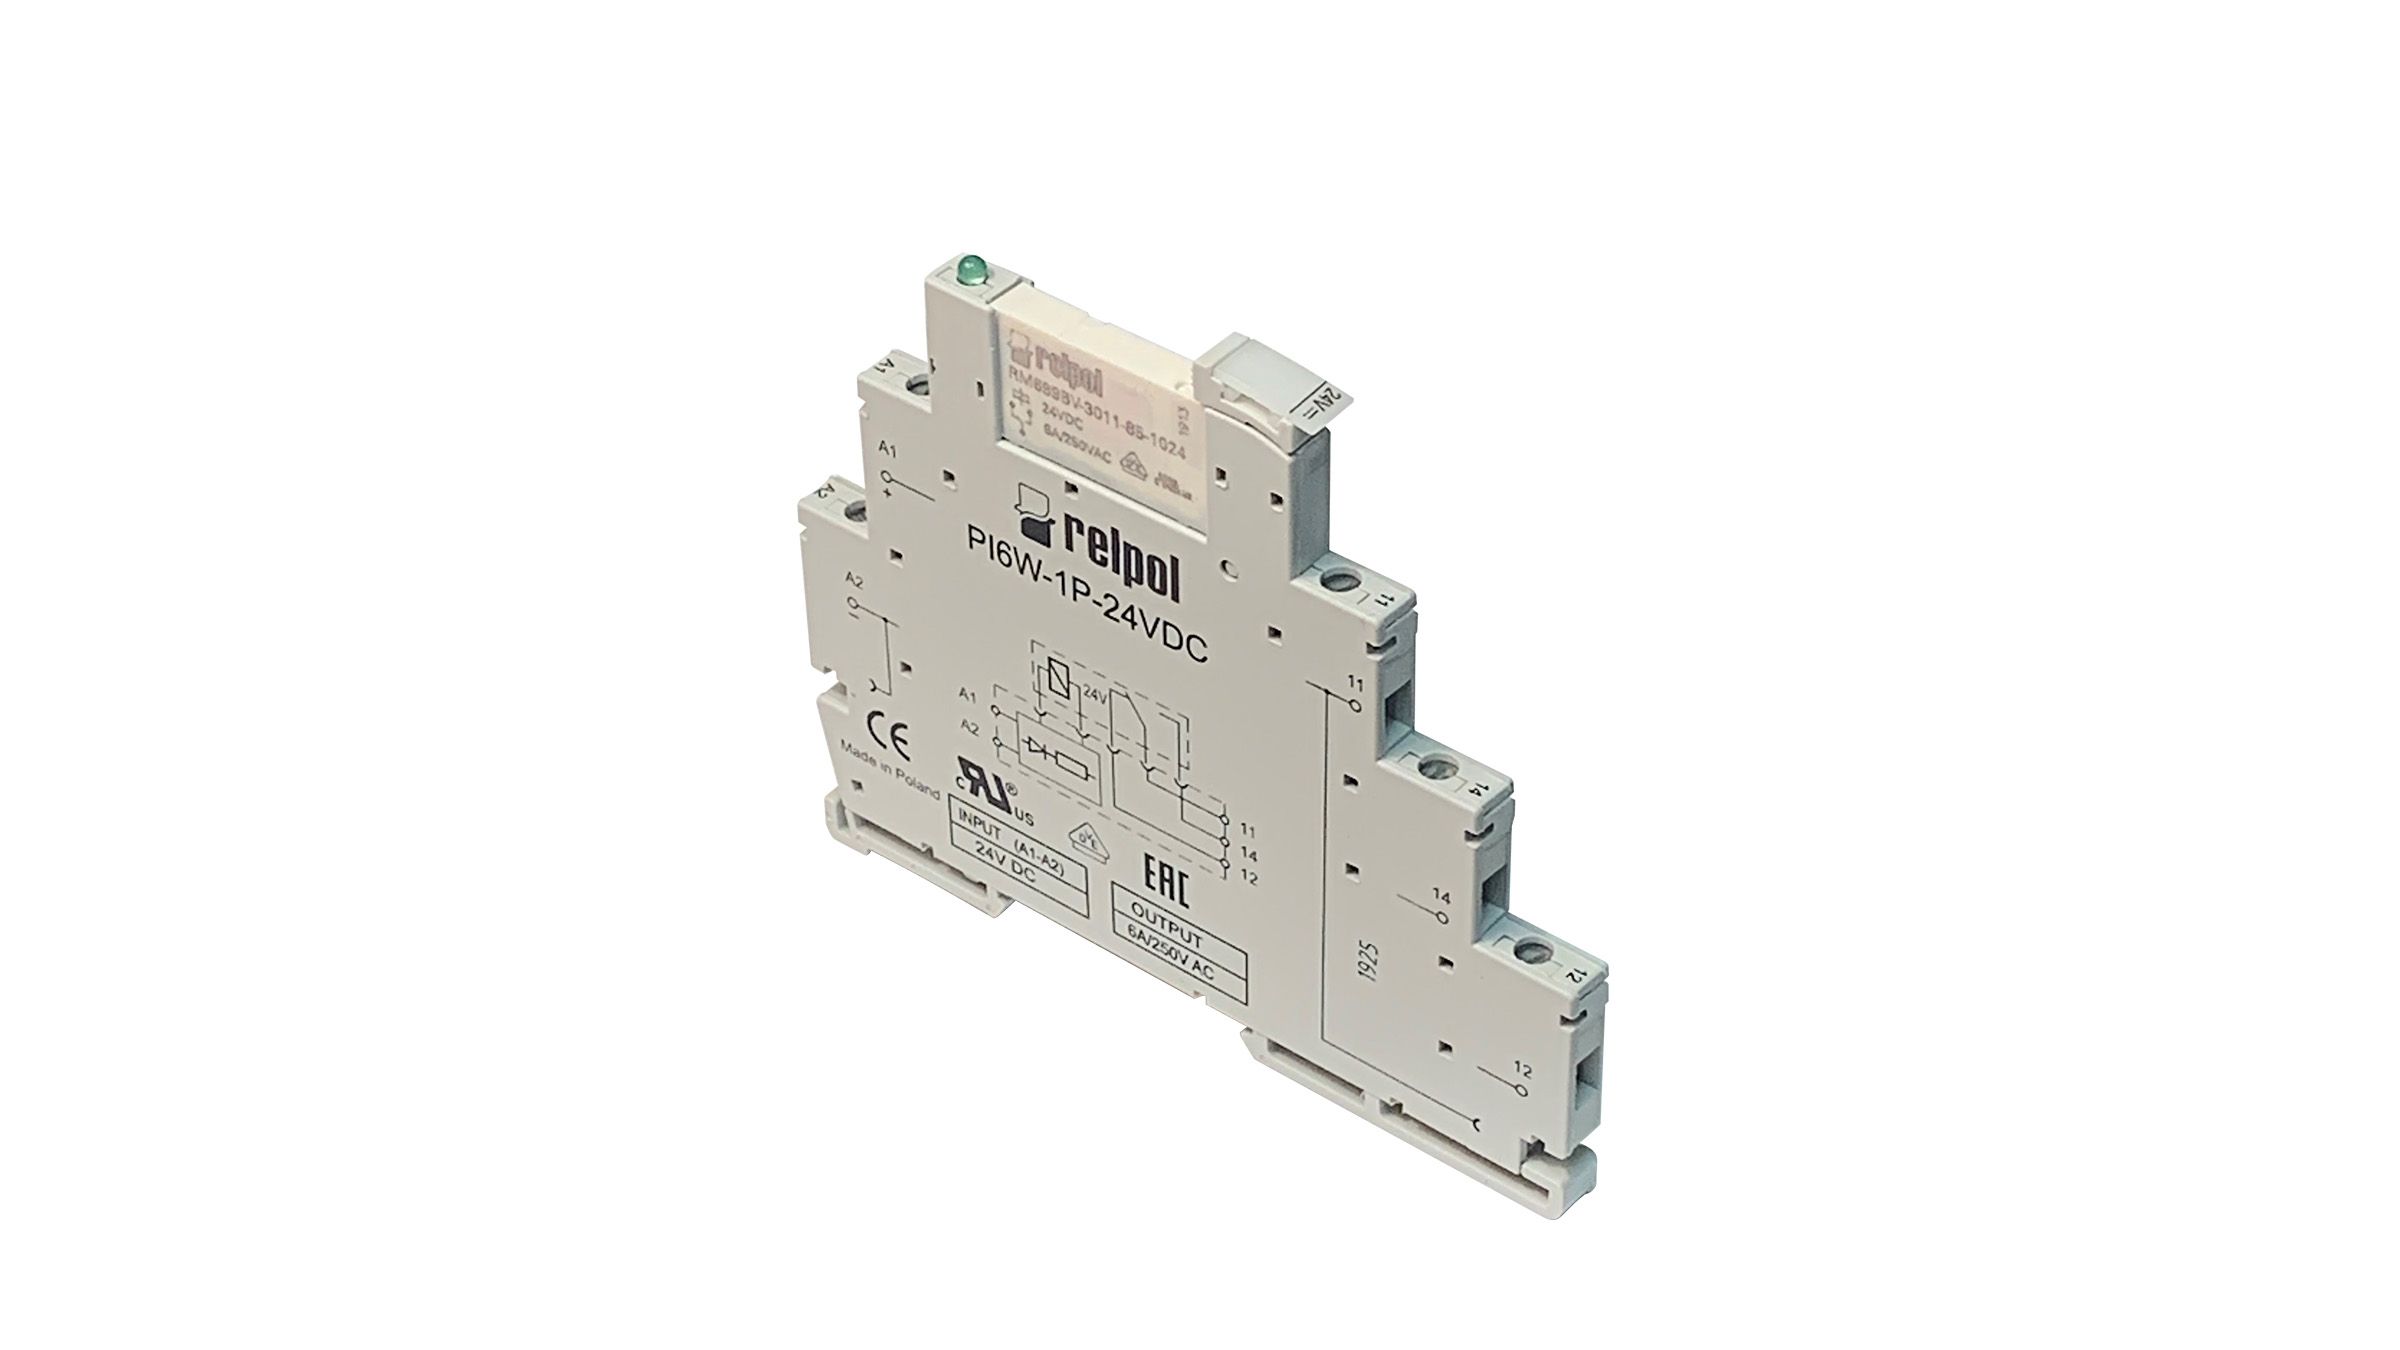 An extensive line of control and protection devices, including miniature, tube and square based Plug-in Power Relays, Interface PCB Relays, and Slim Interface Terminal Block Relays.